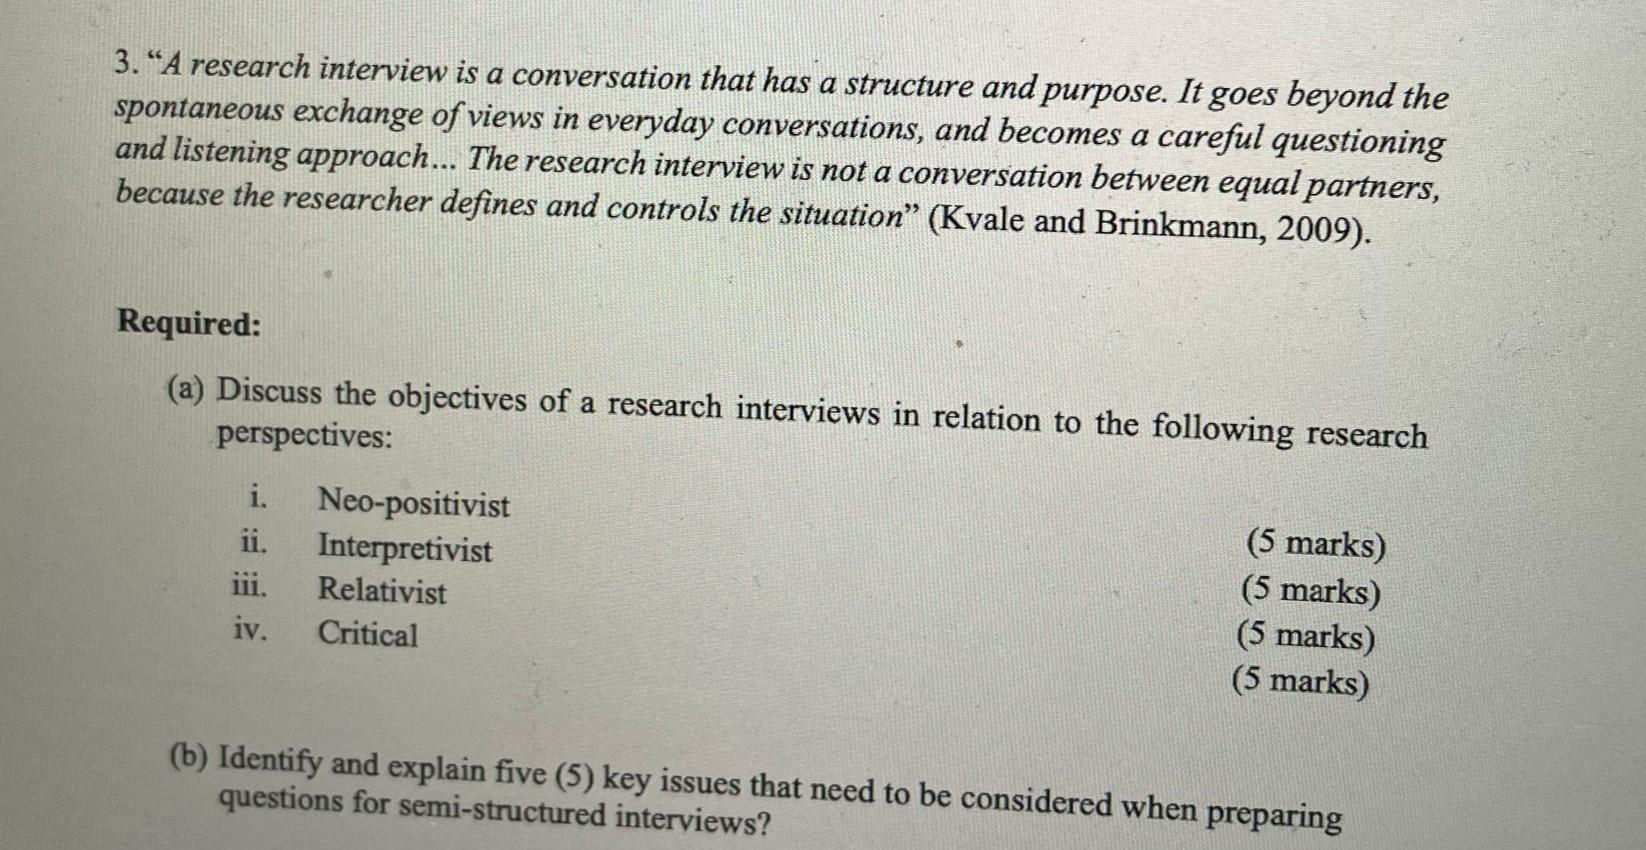 3. “A research interview is a conversation that has a structure and purpose. It goes beyond the
spontaneous exchange of views